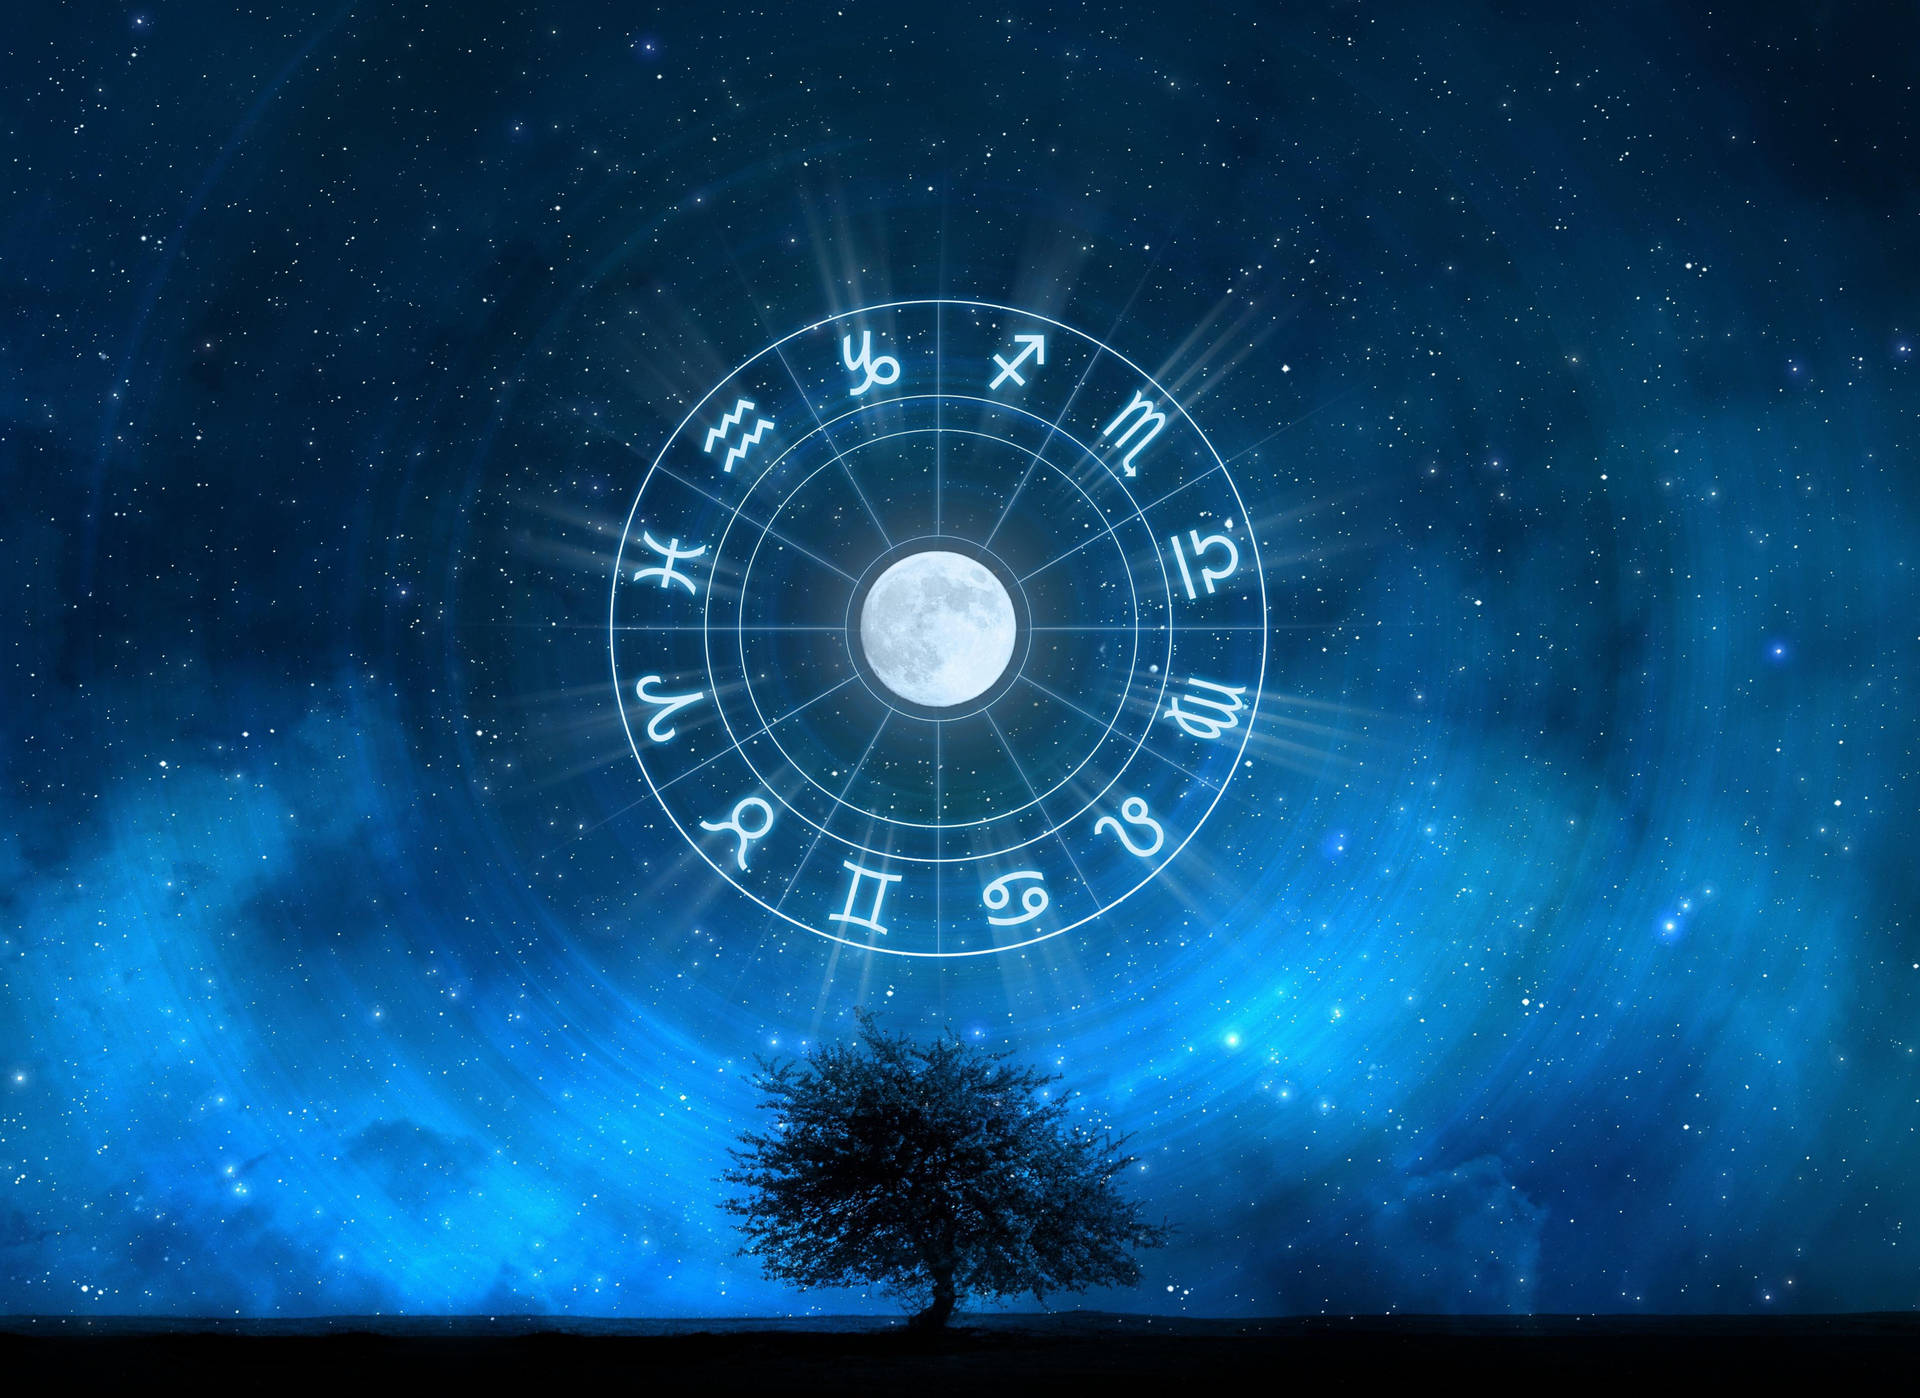 Free Zodiac Signs Wallpaper Downloads, [400+] Zodiac Signs Wallpapers for  FREE 